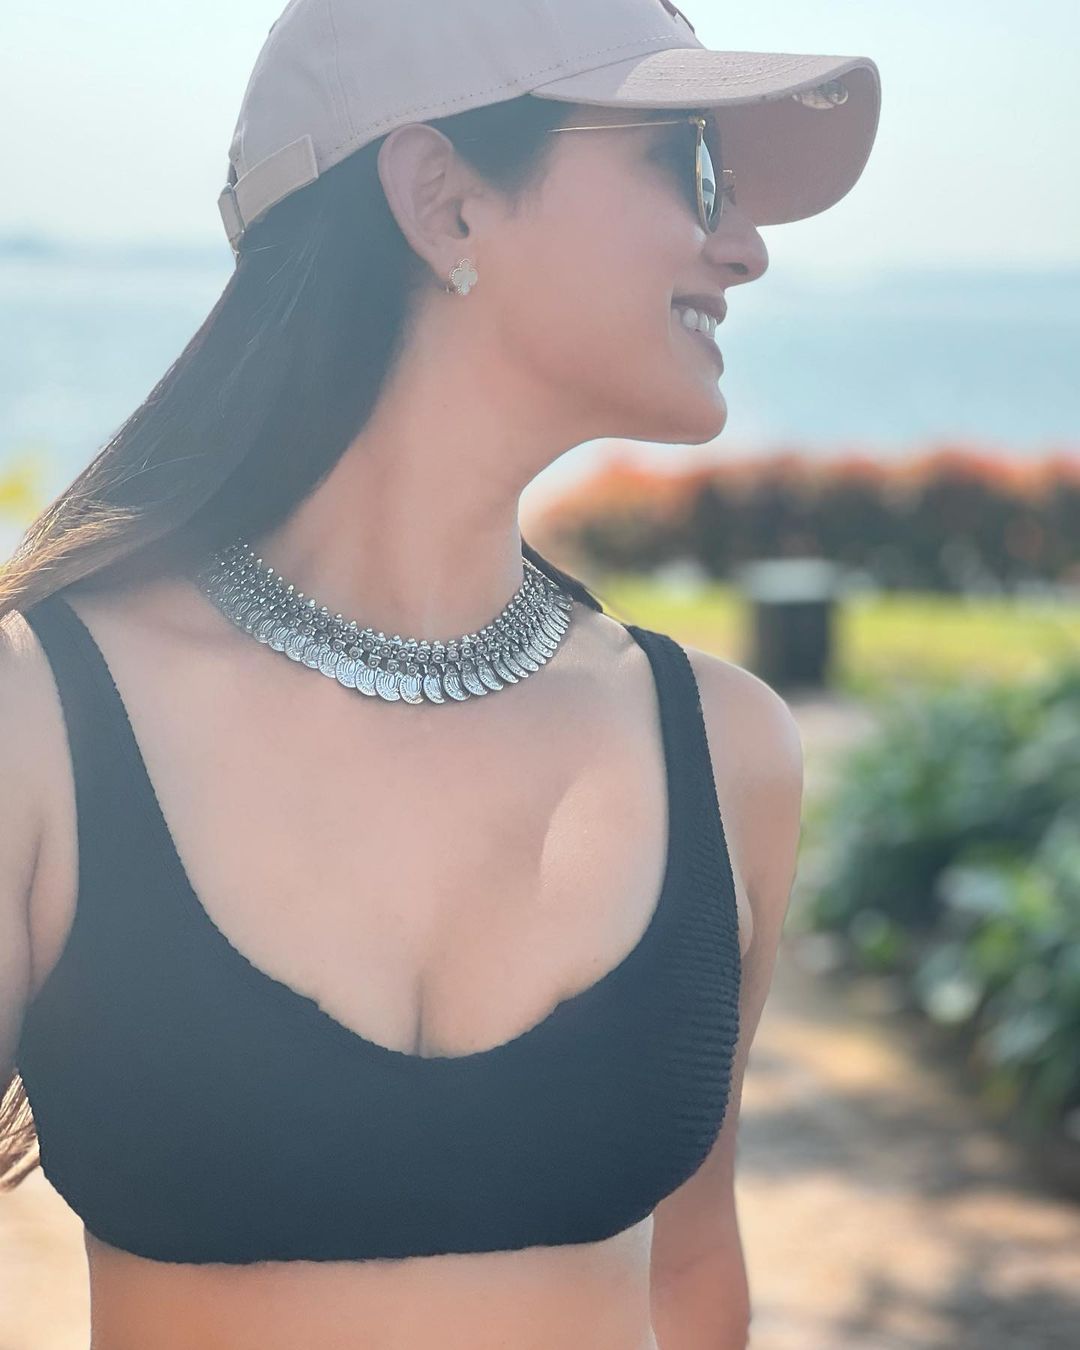  Sonal Chauhan pairs the black bralette with an embellished neckpiece and a cap. (Image: Instagram)